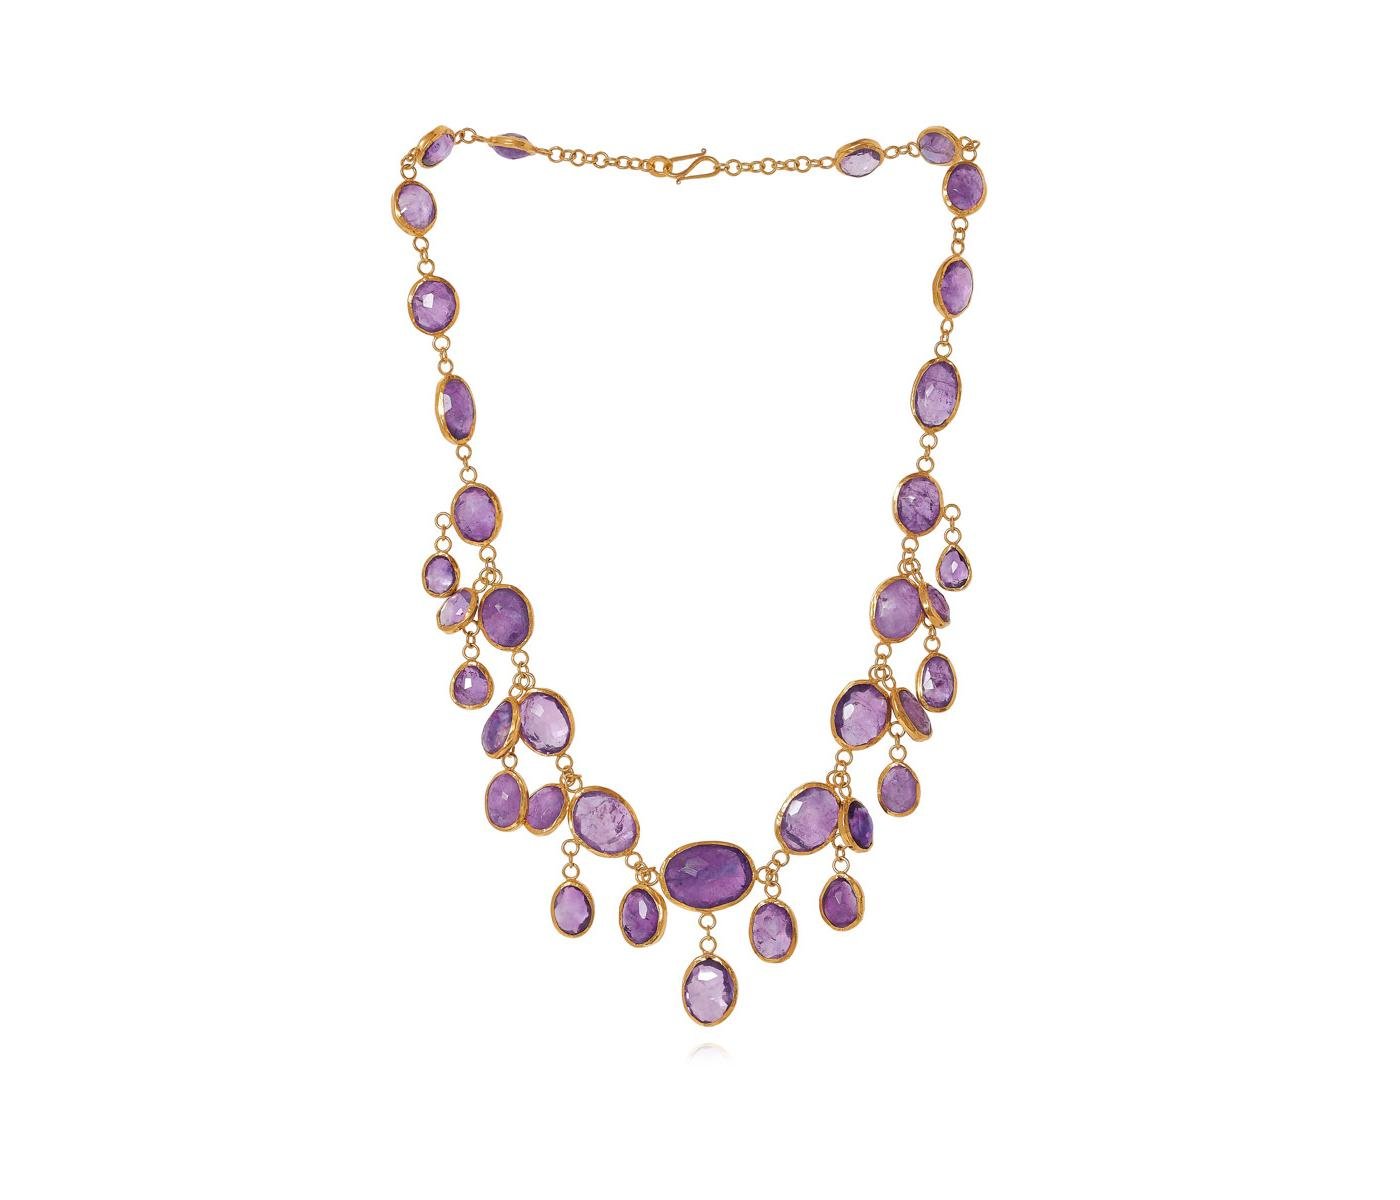 Necklace by Pippa Small